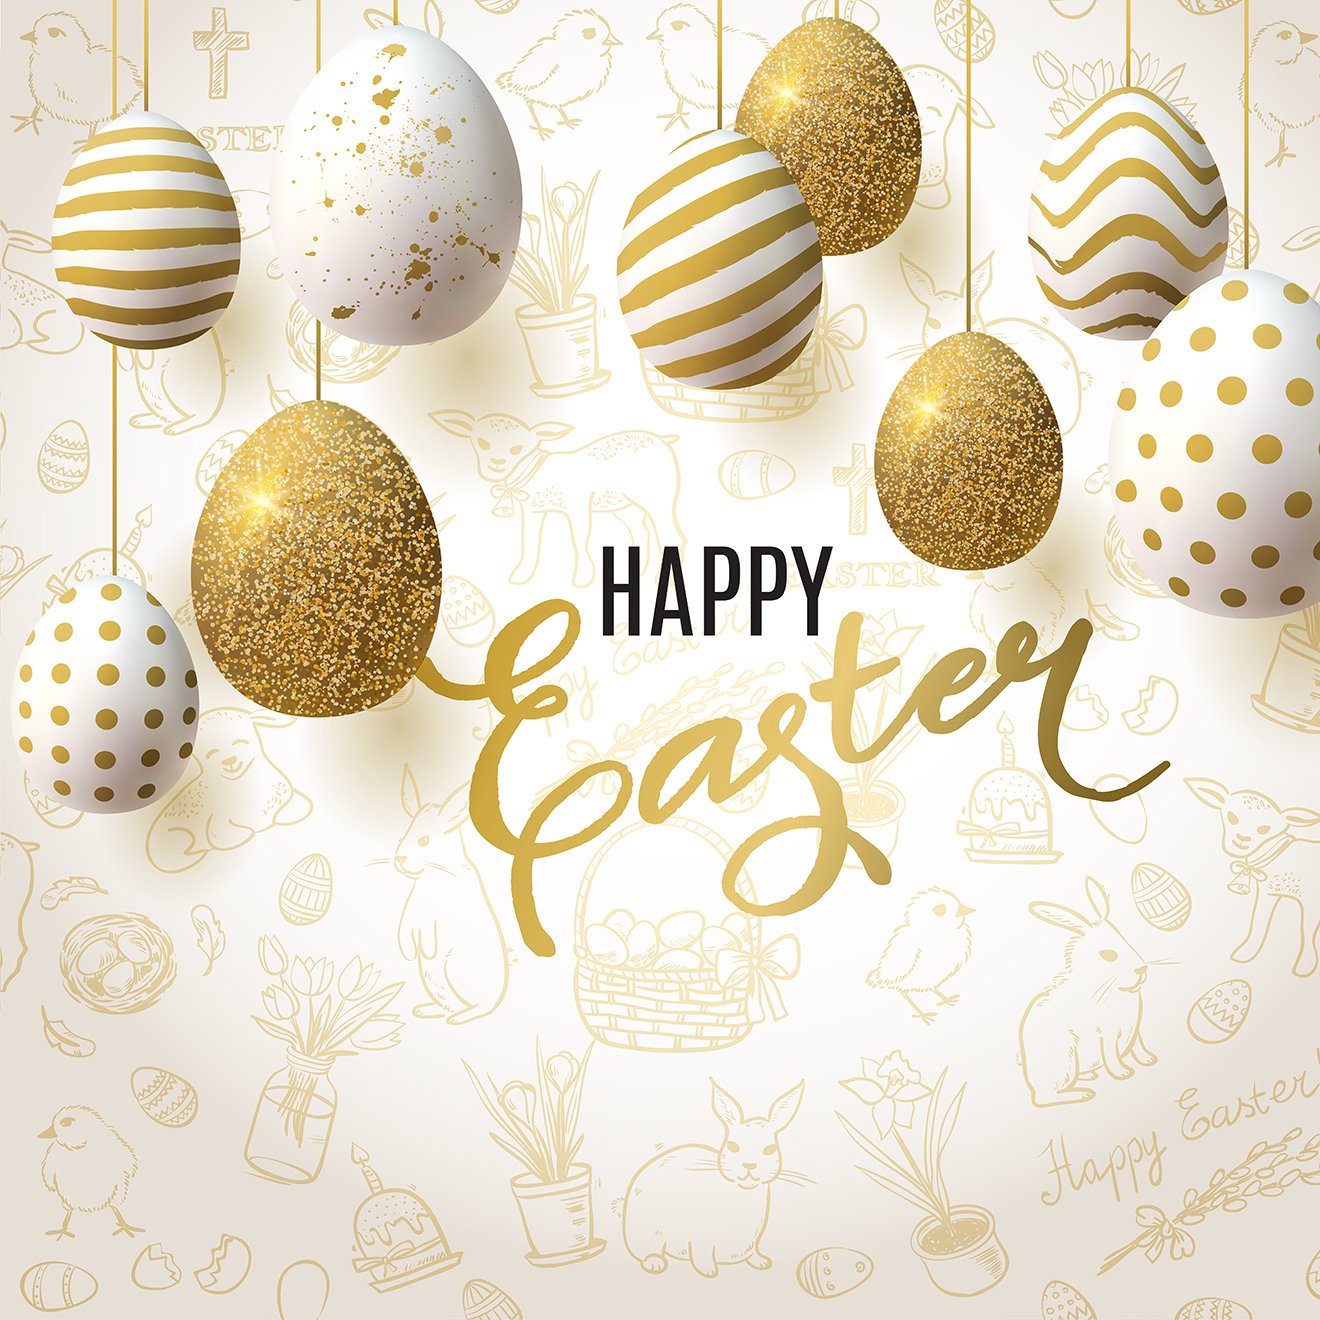 Customized Text Happy Easter Hanging Egg Background Photography Backdrop for Baby IBD-19925 - iBACKDROP-Baby Kid Backdrops, Cartoon backdrop, Children Cartoon Background, Easter Backdrop, Easter Backdrops, Easter Photography Backdrops, festival backdrops, Festival Background, photography backdrops